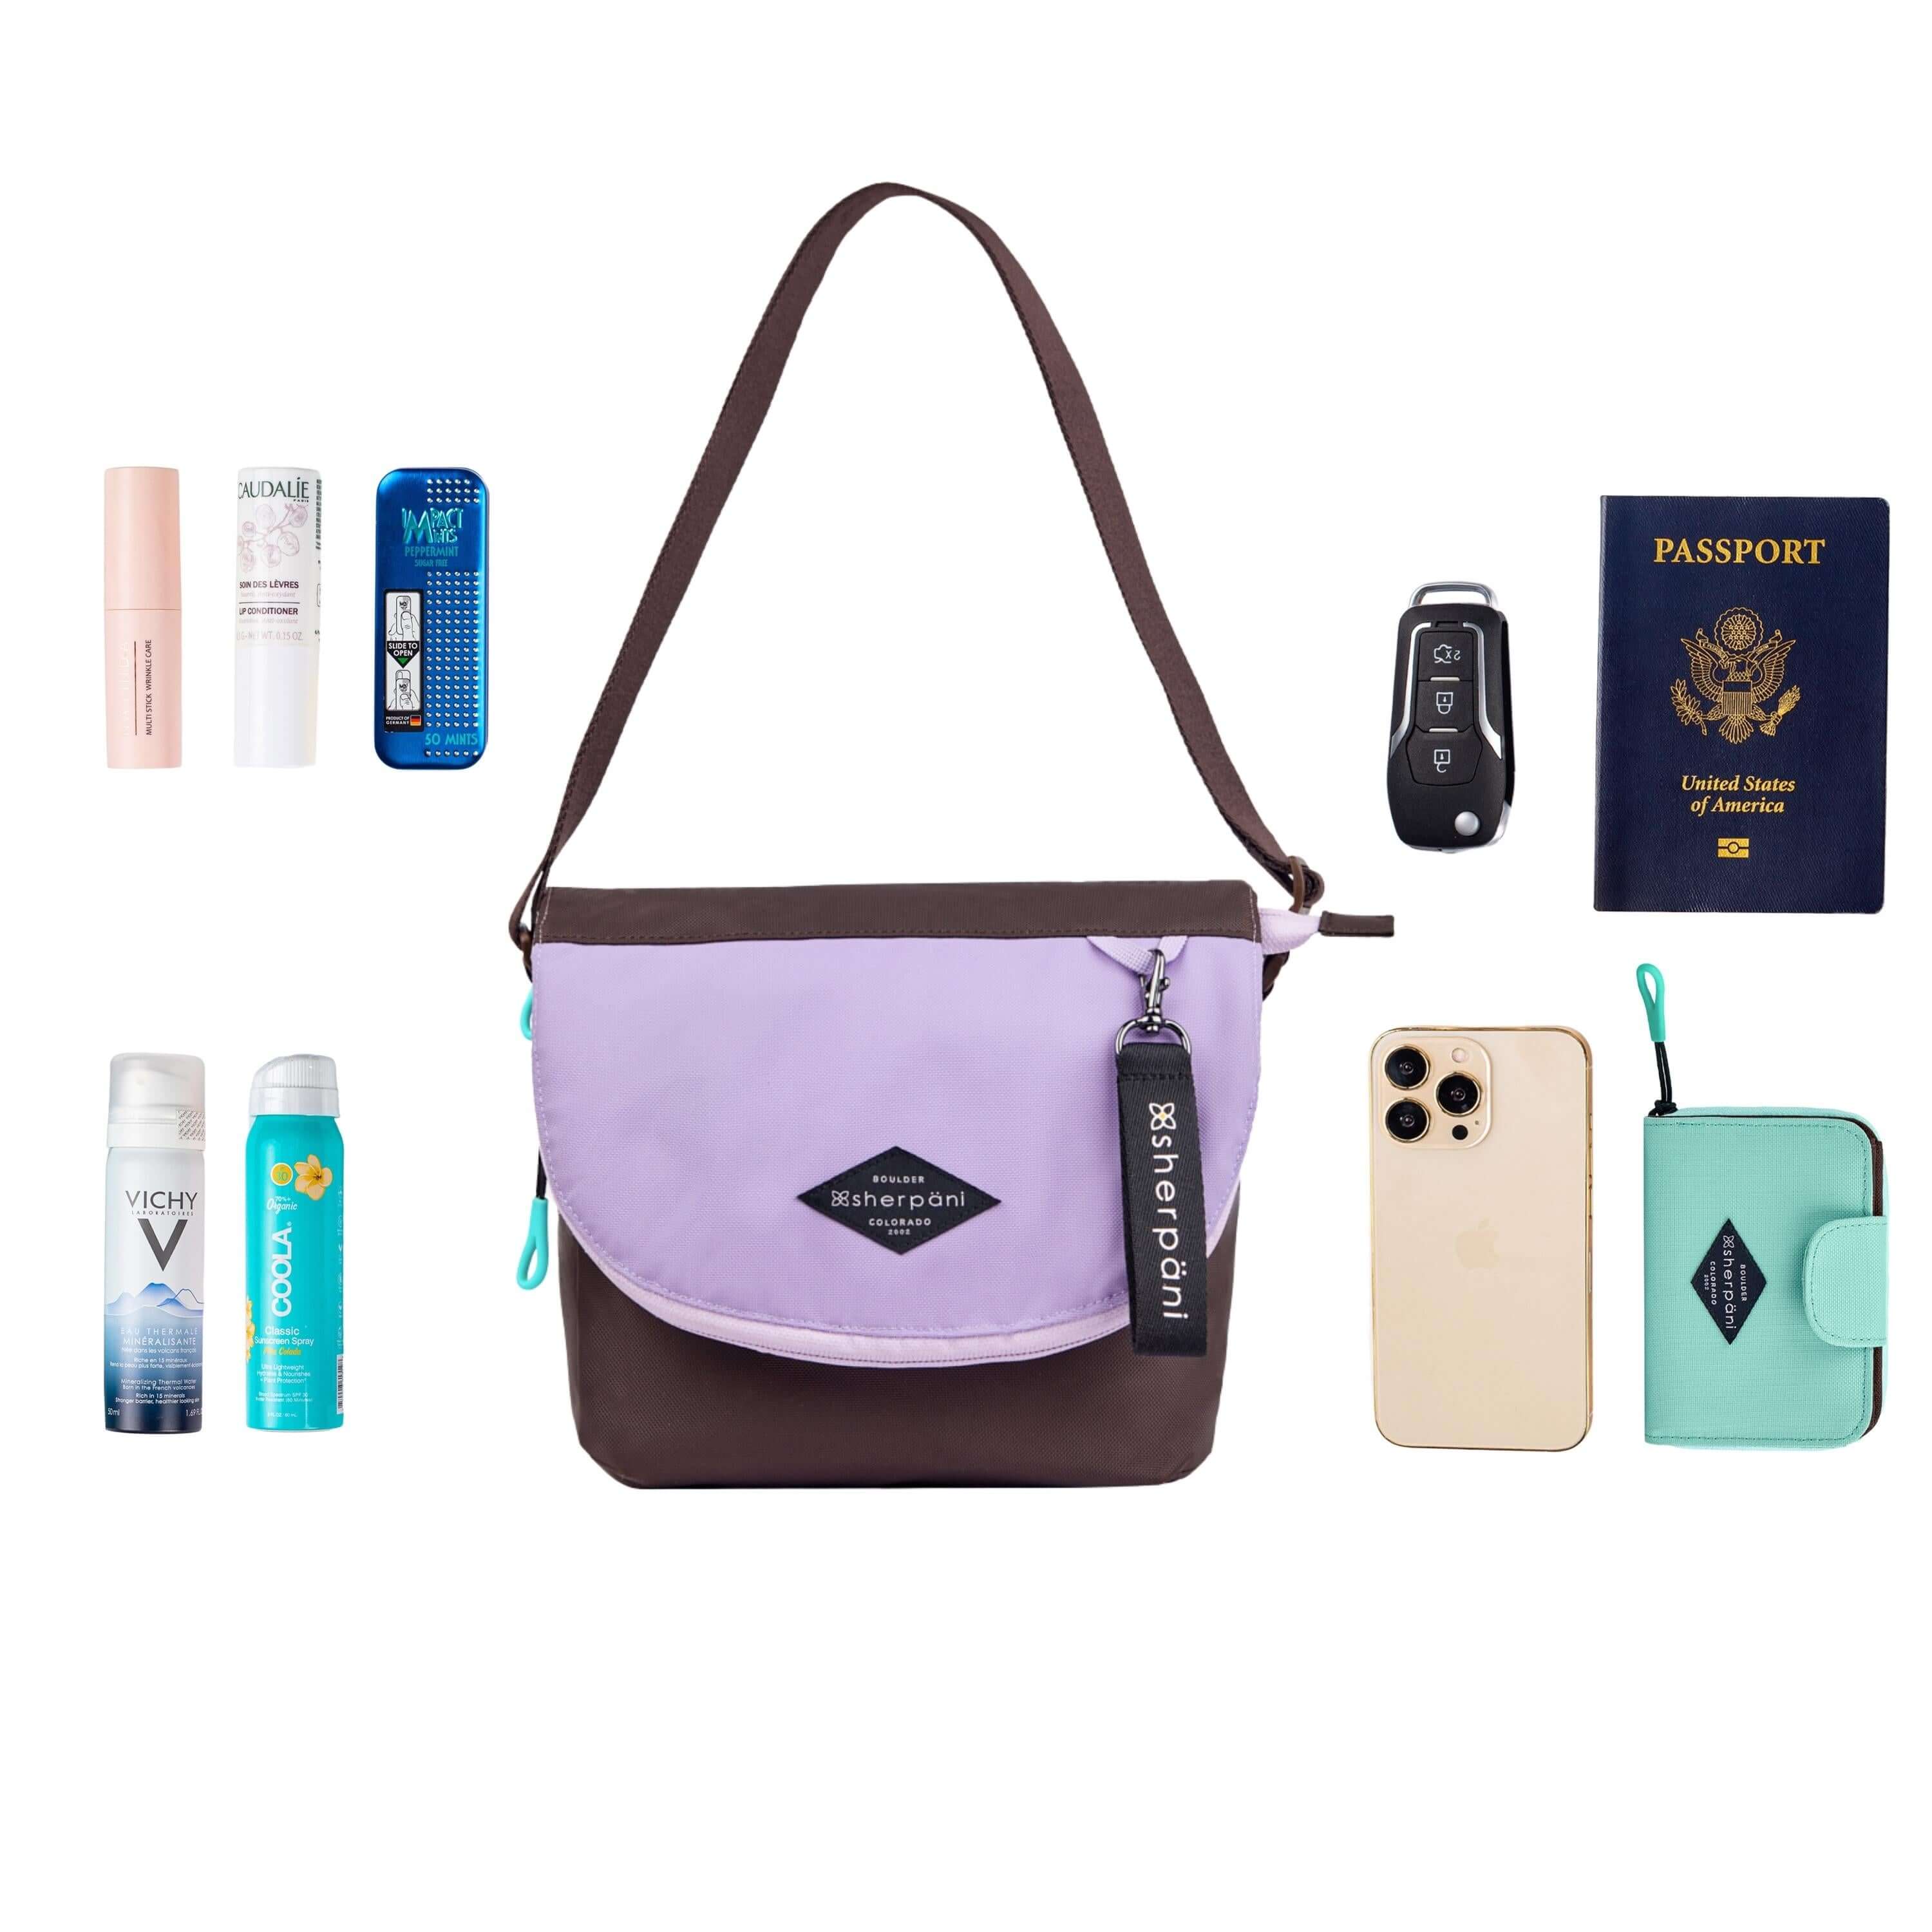 Top view of example items to fill the bag. Sherpani crossbody, the Milli in Lavender, lies in the center. It is surrounded by an assortment of items: skincare products, sunscreen, beauty spray, car key, passport, phone and Sherpani travel accessory the Barcelona in Seagreen.